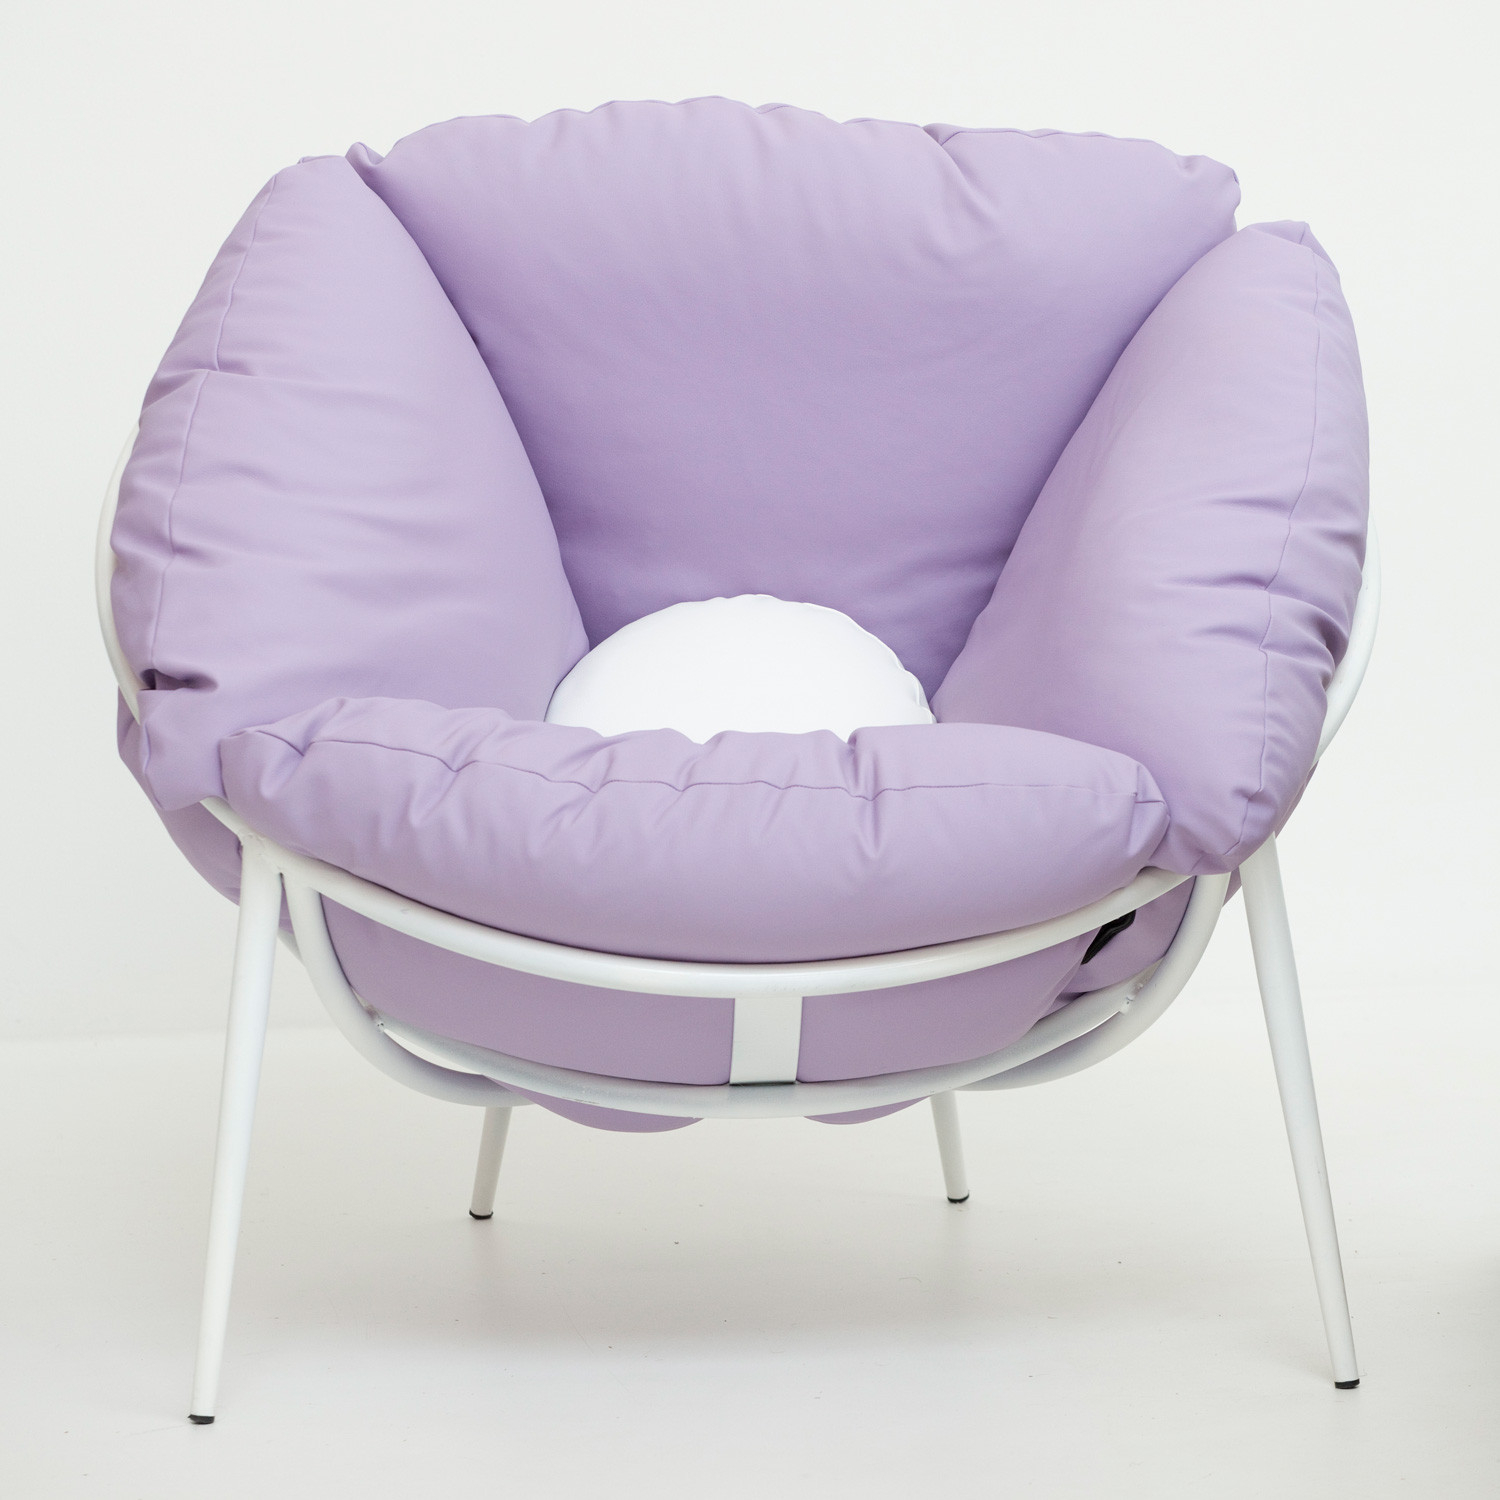 Bloom chair violet furniture purple lounge chairs